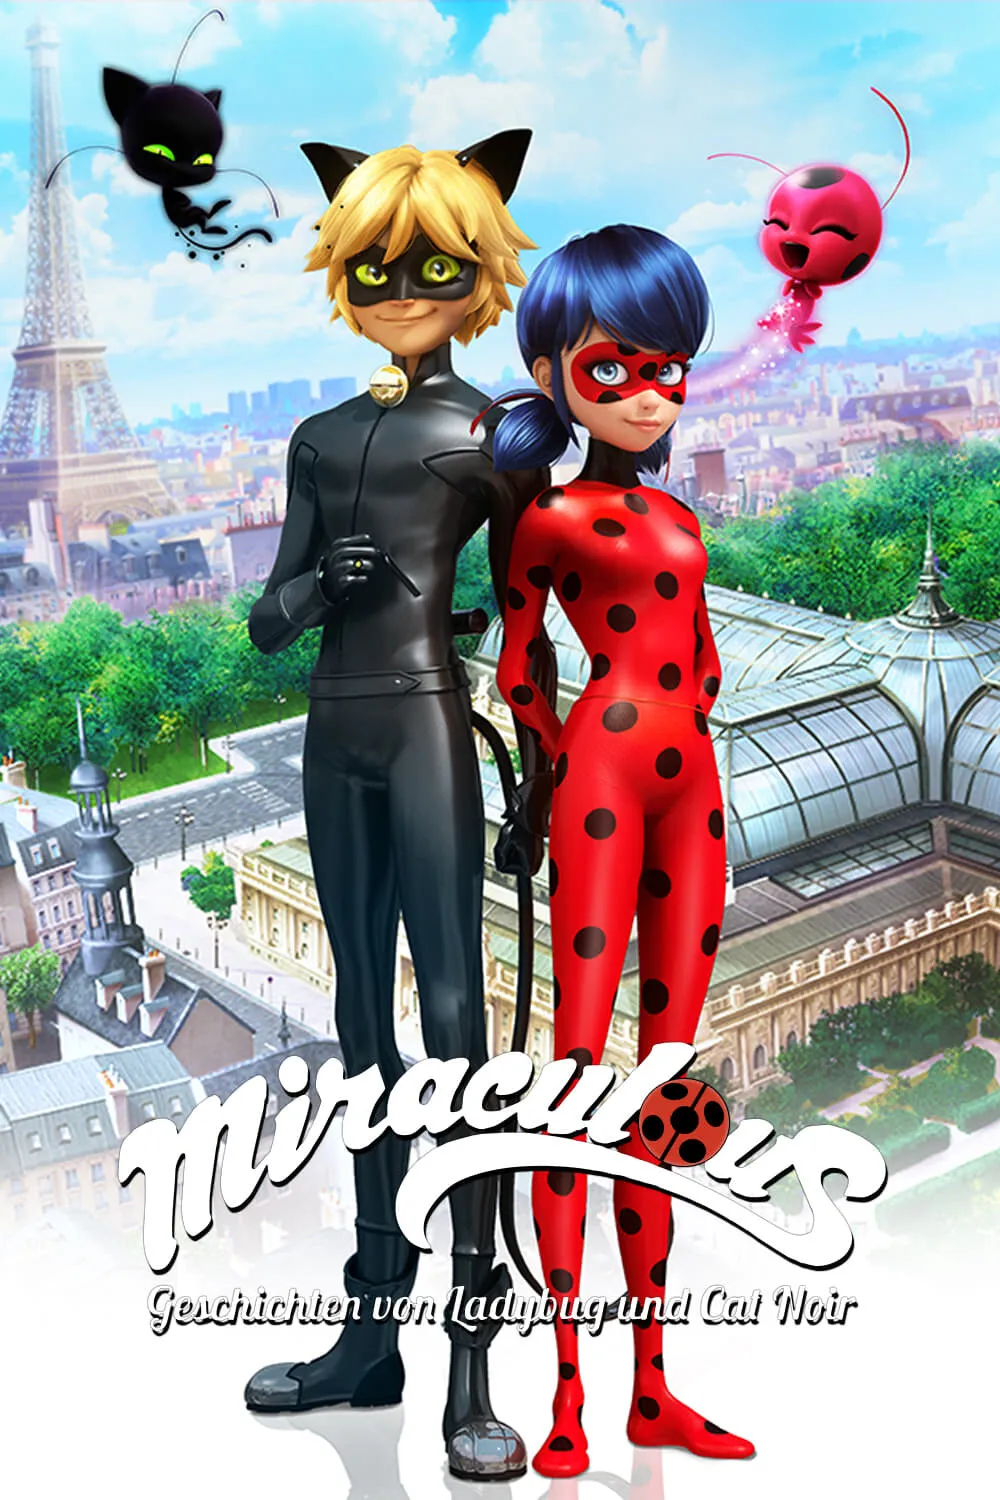 Best Movies and TV shows Like Miraculous: Tales of Ladybug & Cat